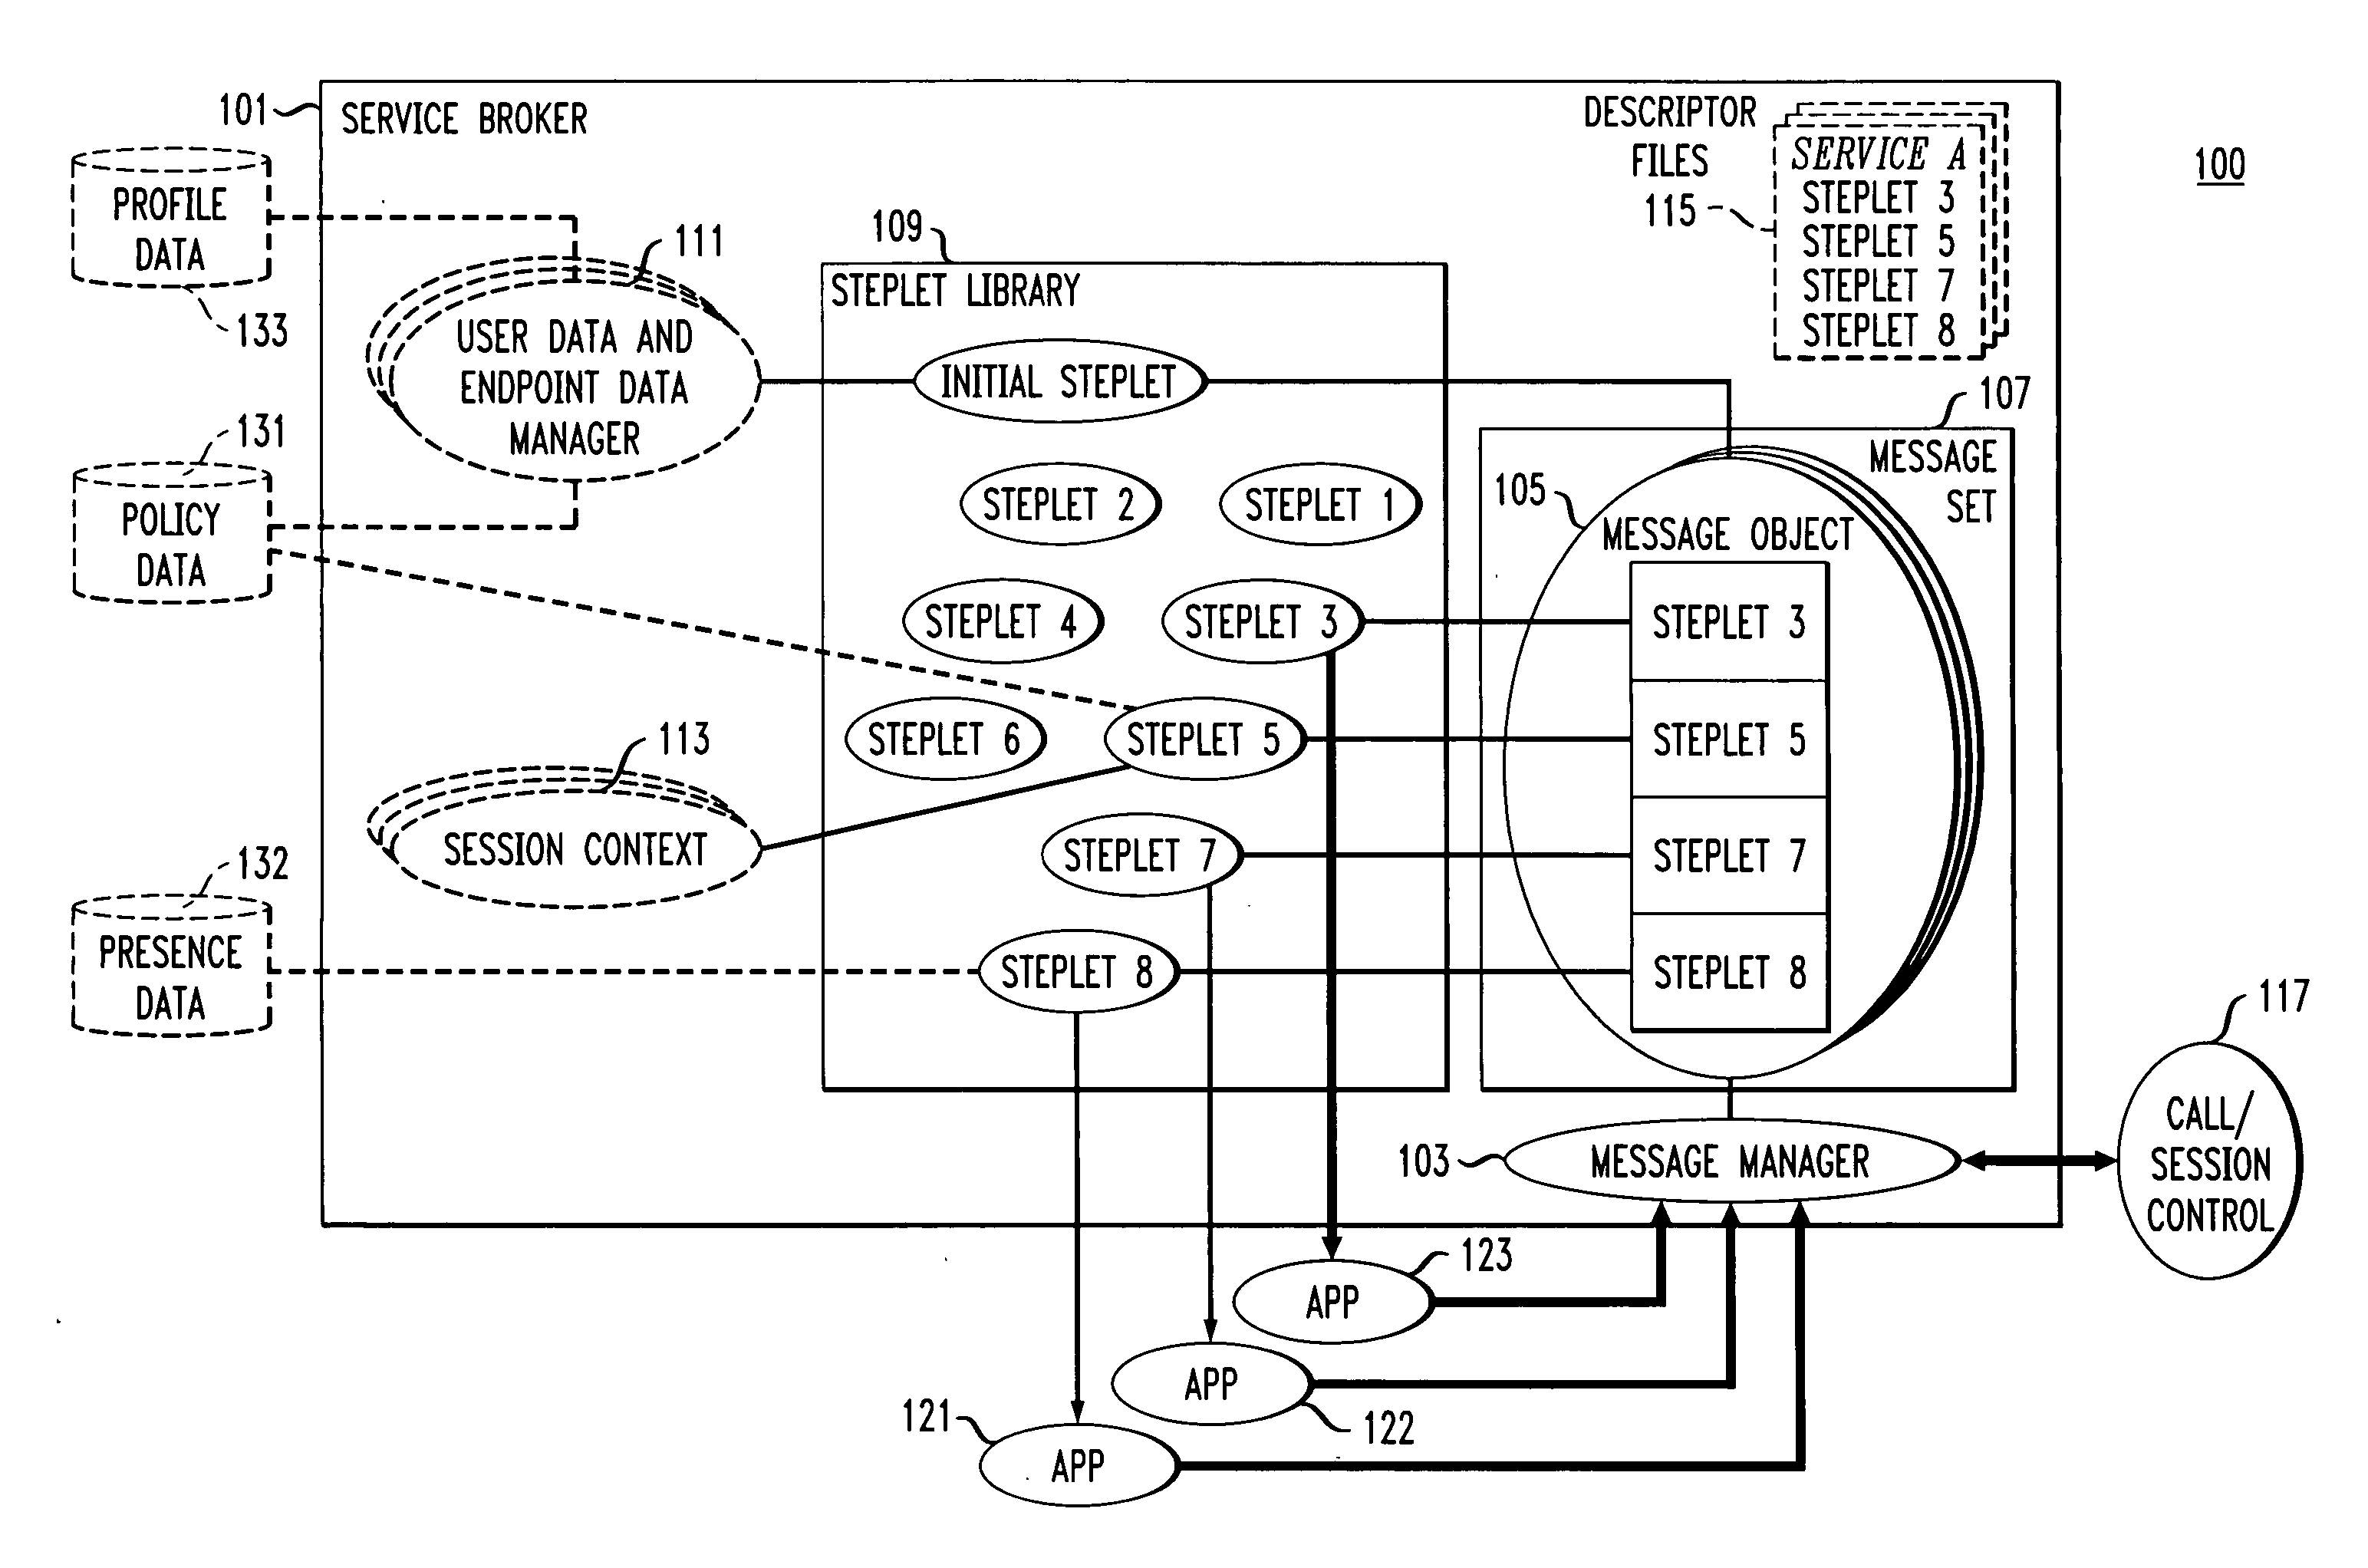 Enhanced system for controlling service interaction and for providing blending of services